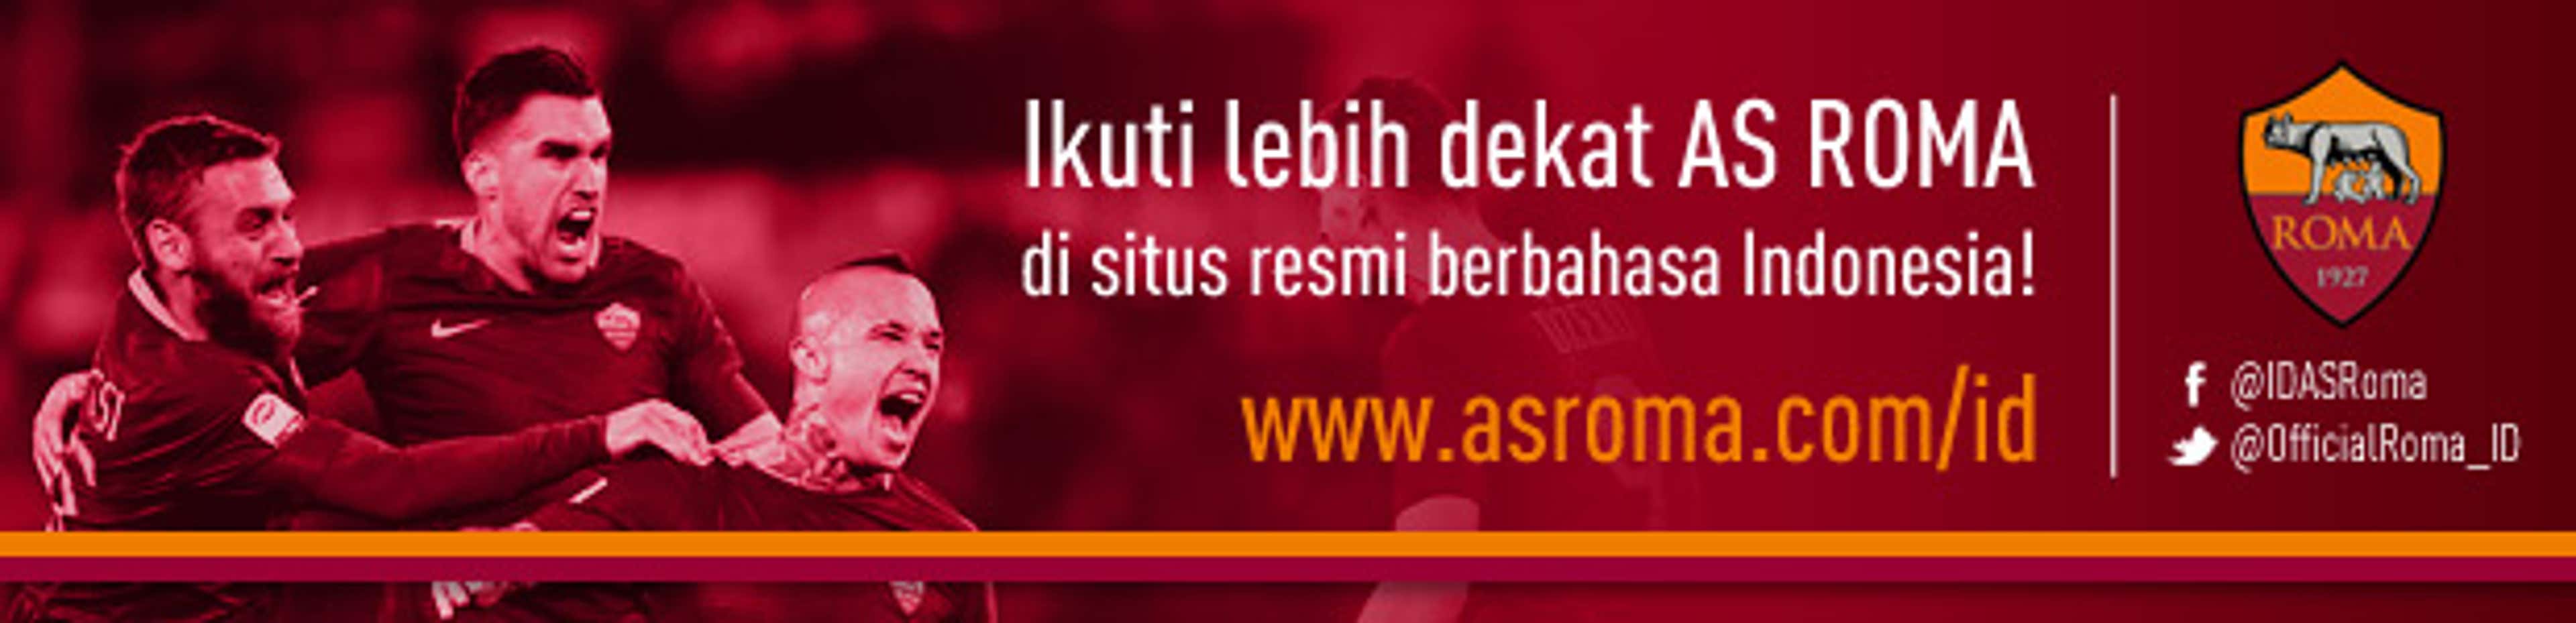 Footer banner AS ROMA